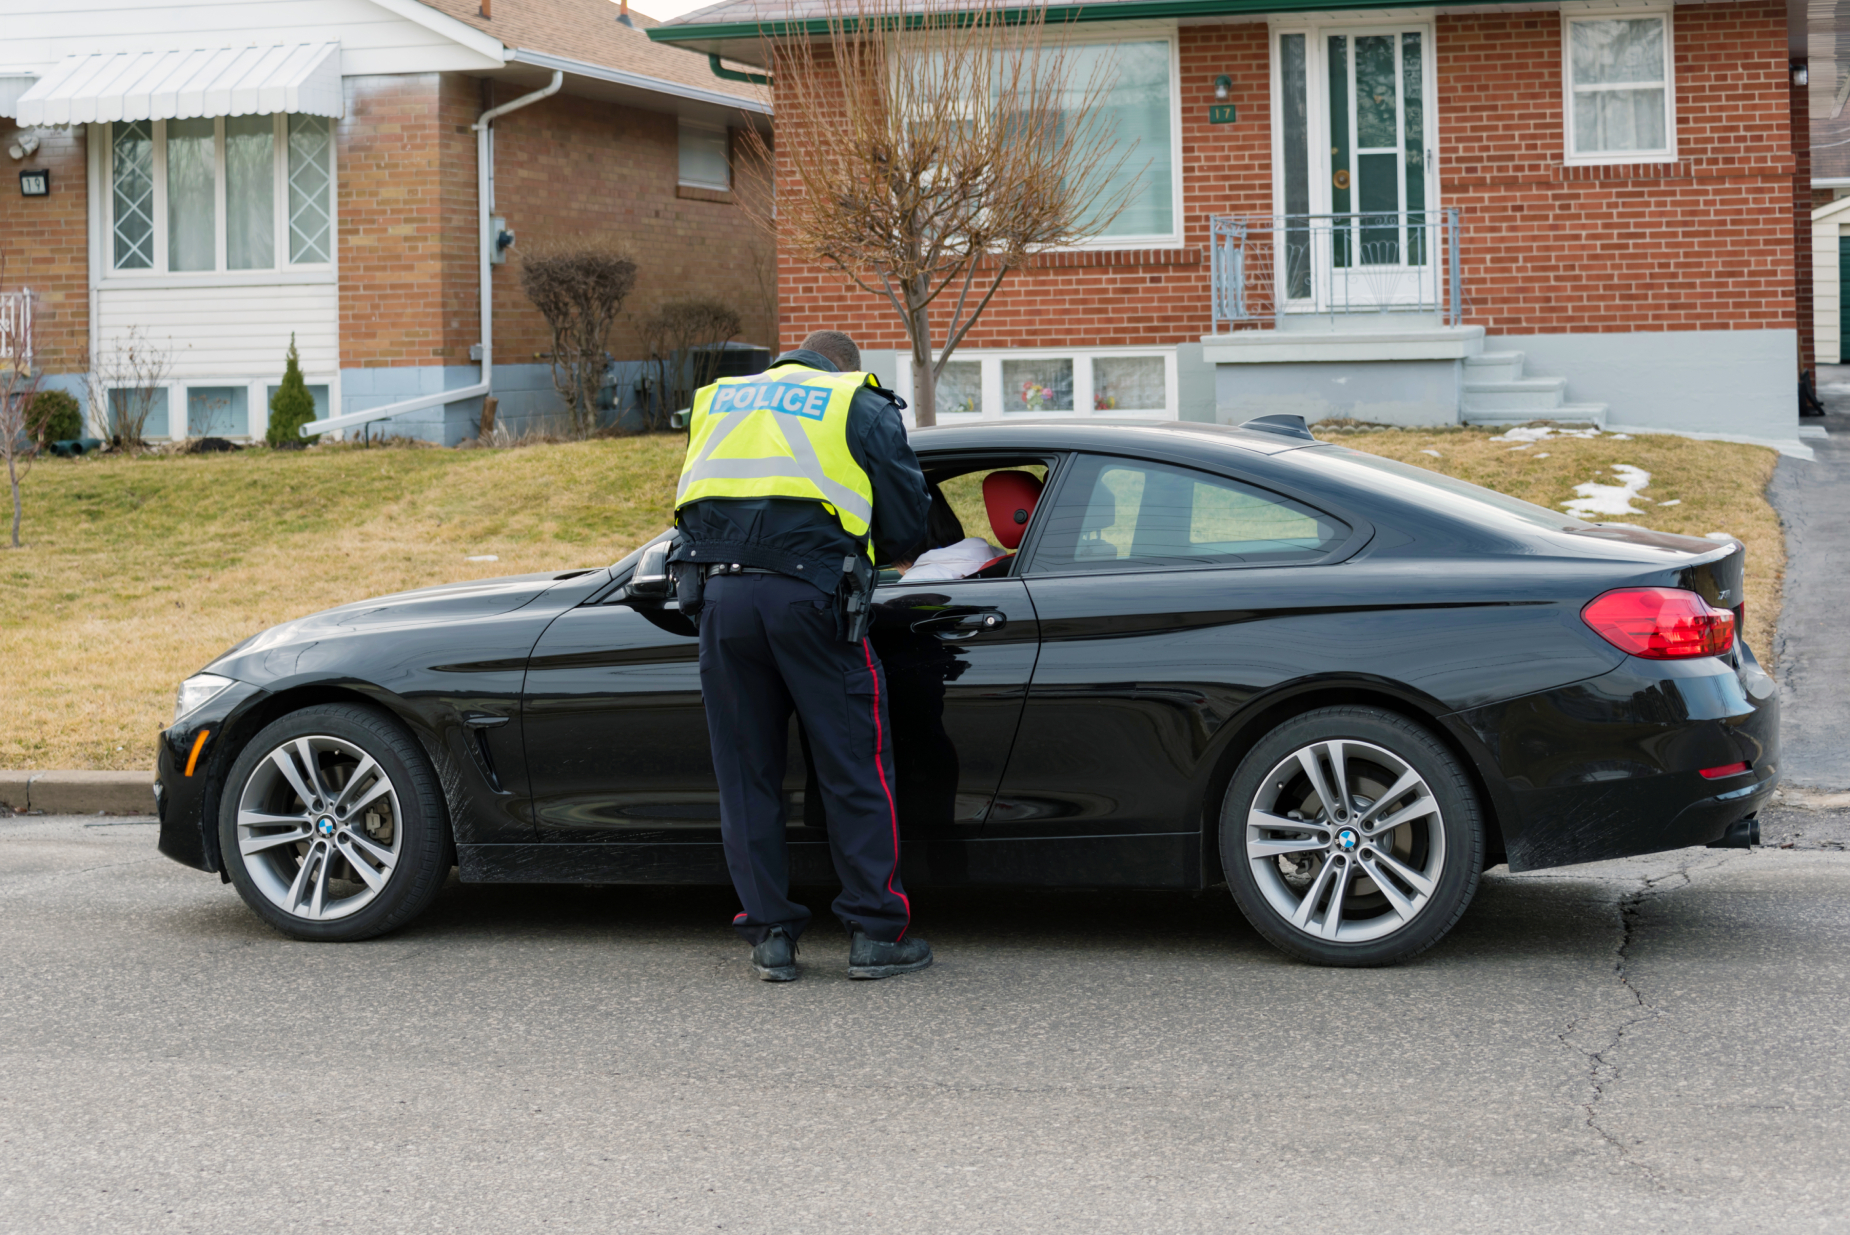 A cop giving a speeding ticket to a driver in a black sedan